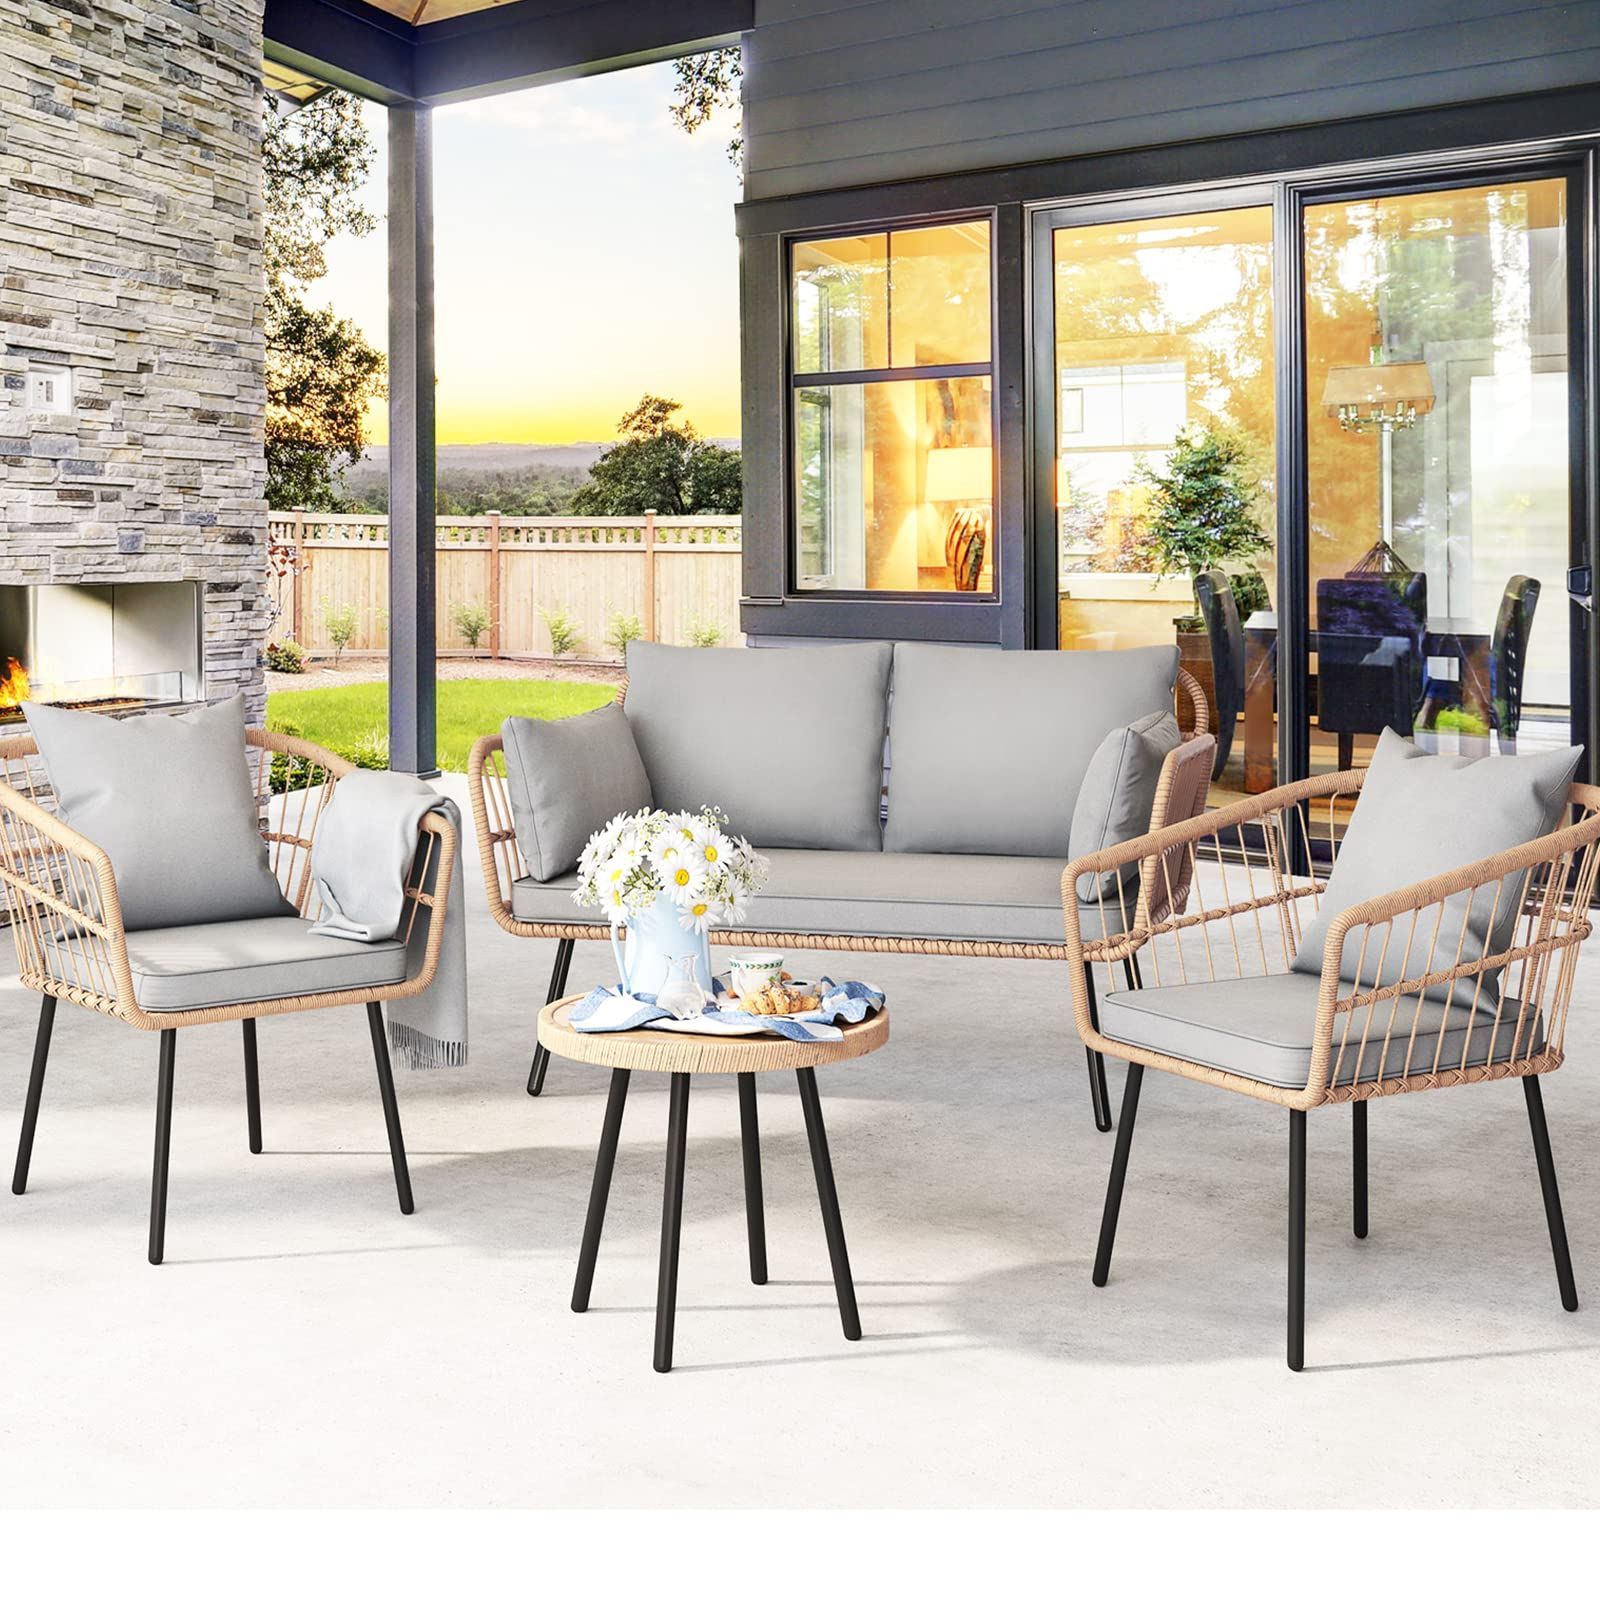 Recent Amazon: Yitahome 4 Pieces Patio Furniture Set, Wicker Balcony Bistro  Set, Outdoor All Weather Rattan Conversation Set With Loveseat Chairs Table Soft  Cushions For Backyard, Pool, Deck, Garden – Grey : Patio, Lawn Pertaining To Balcony And Deck With Soft Cushions (View 4 of 15)